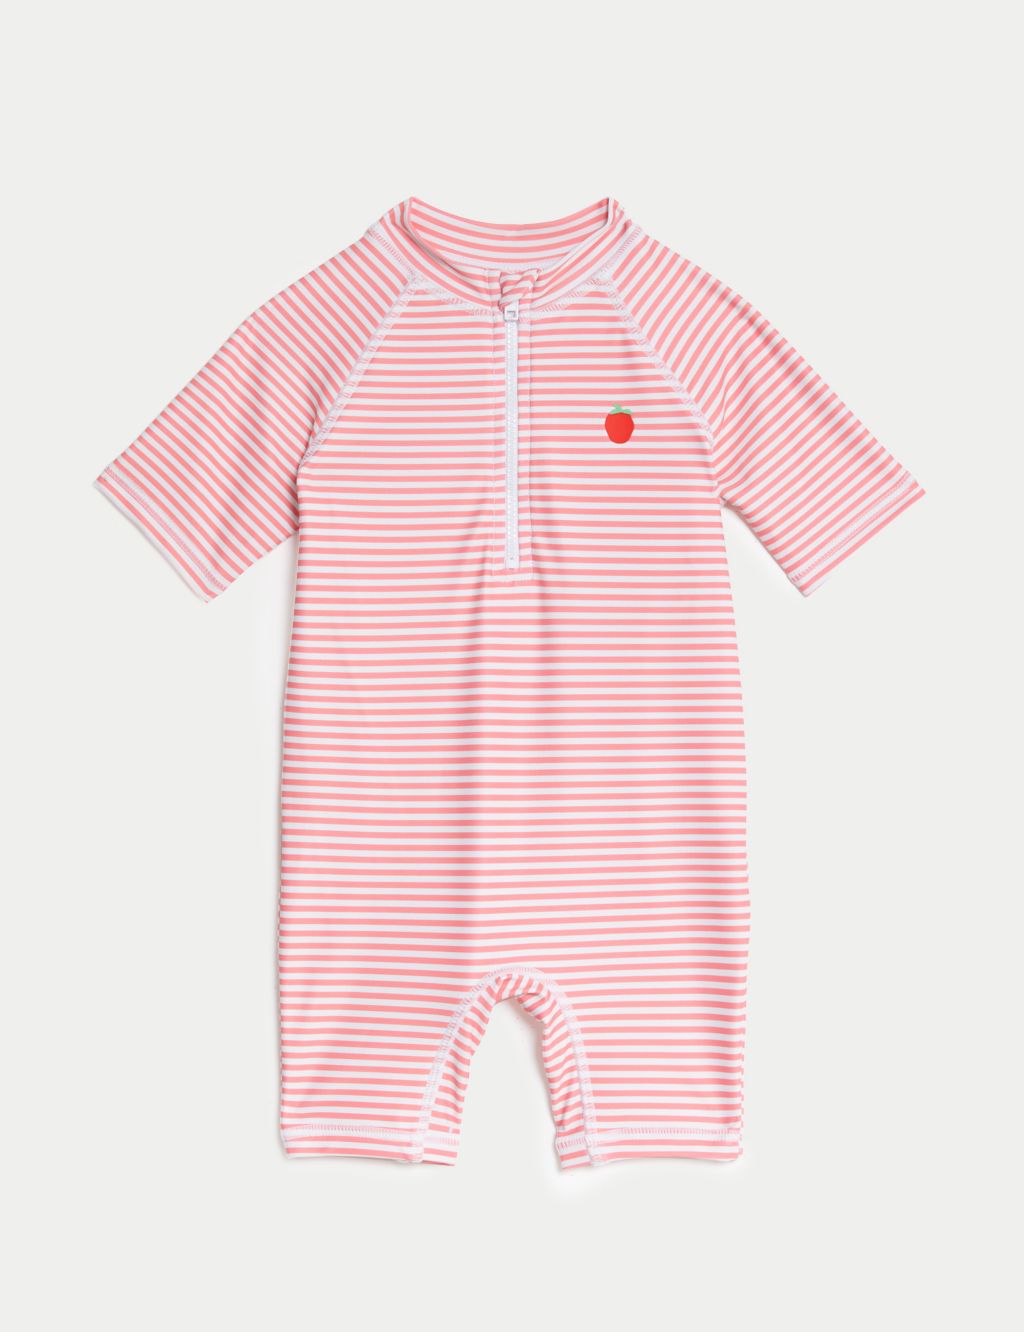 Striped Zip Swimsuit (0-3 Yrs) image 1